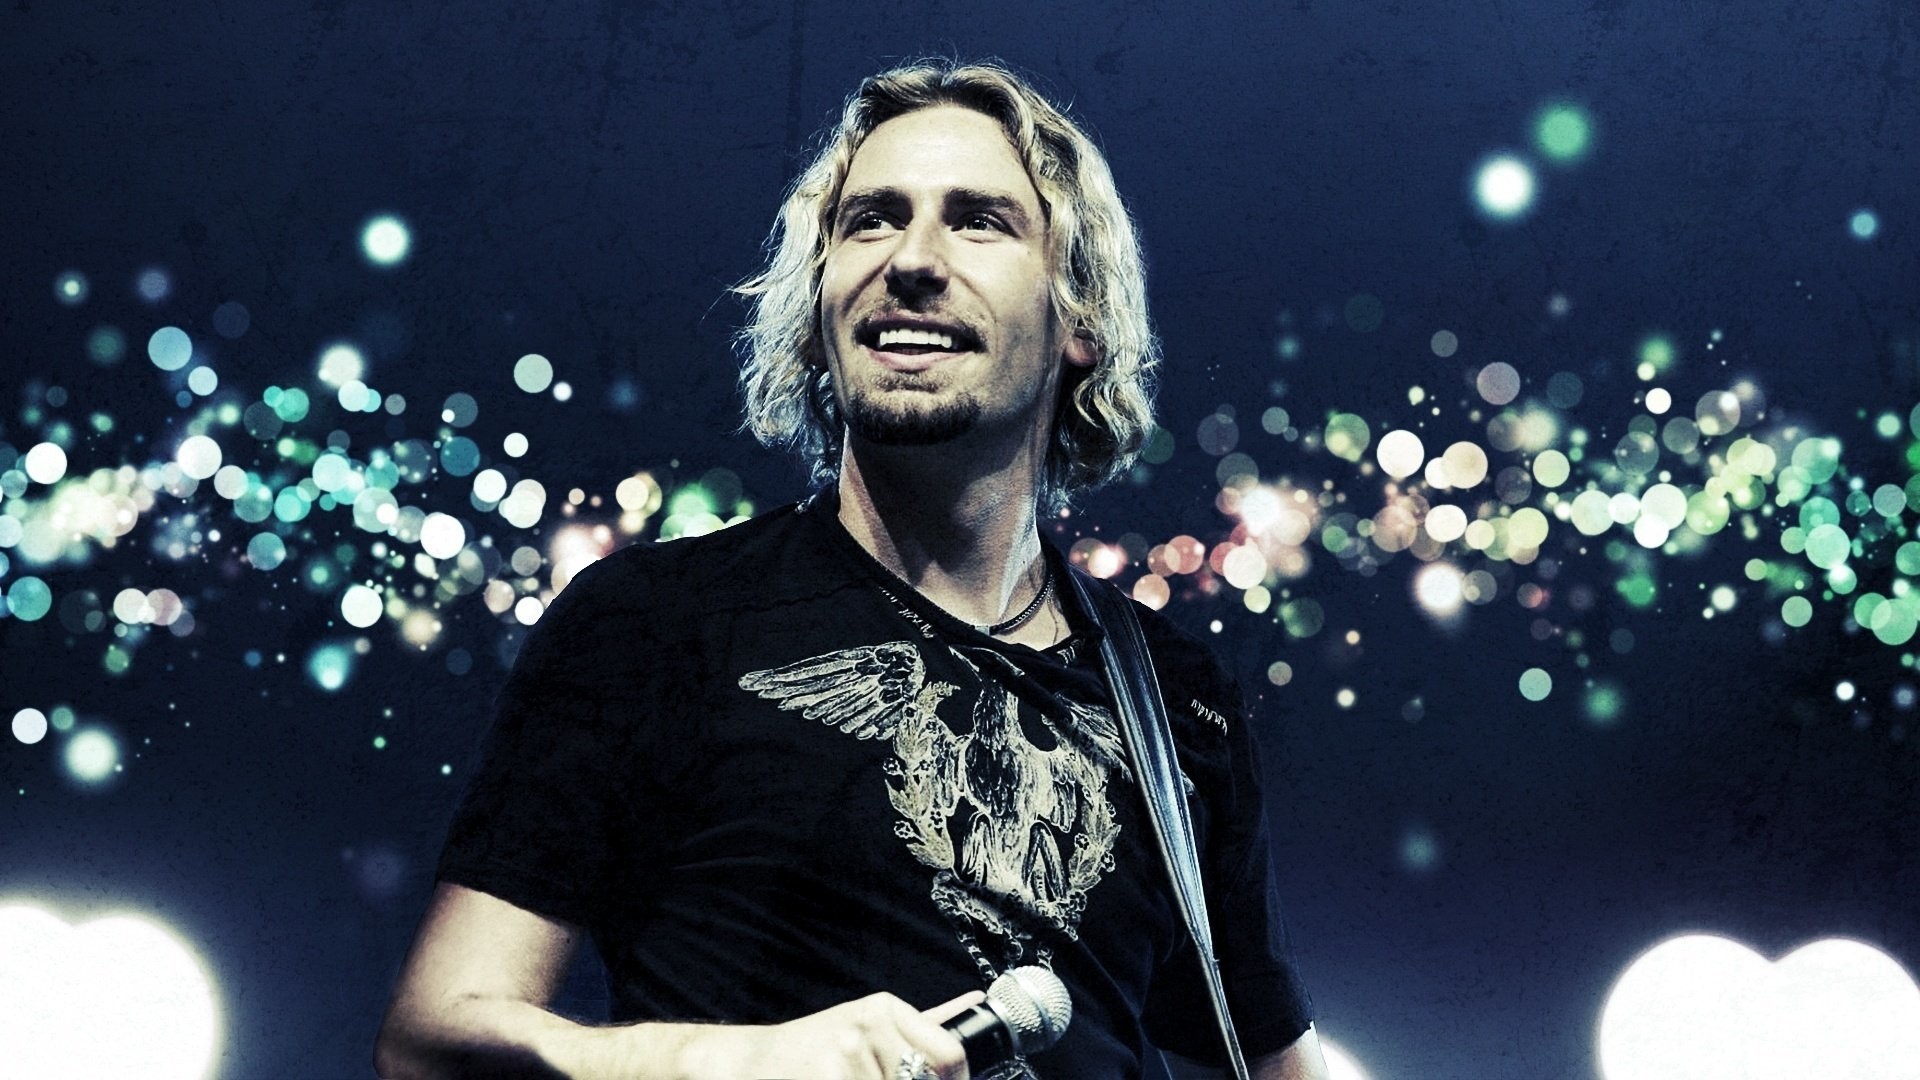 1920x1080 Nickelback Background Free Download by Concetto Hatherell